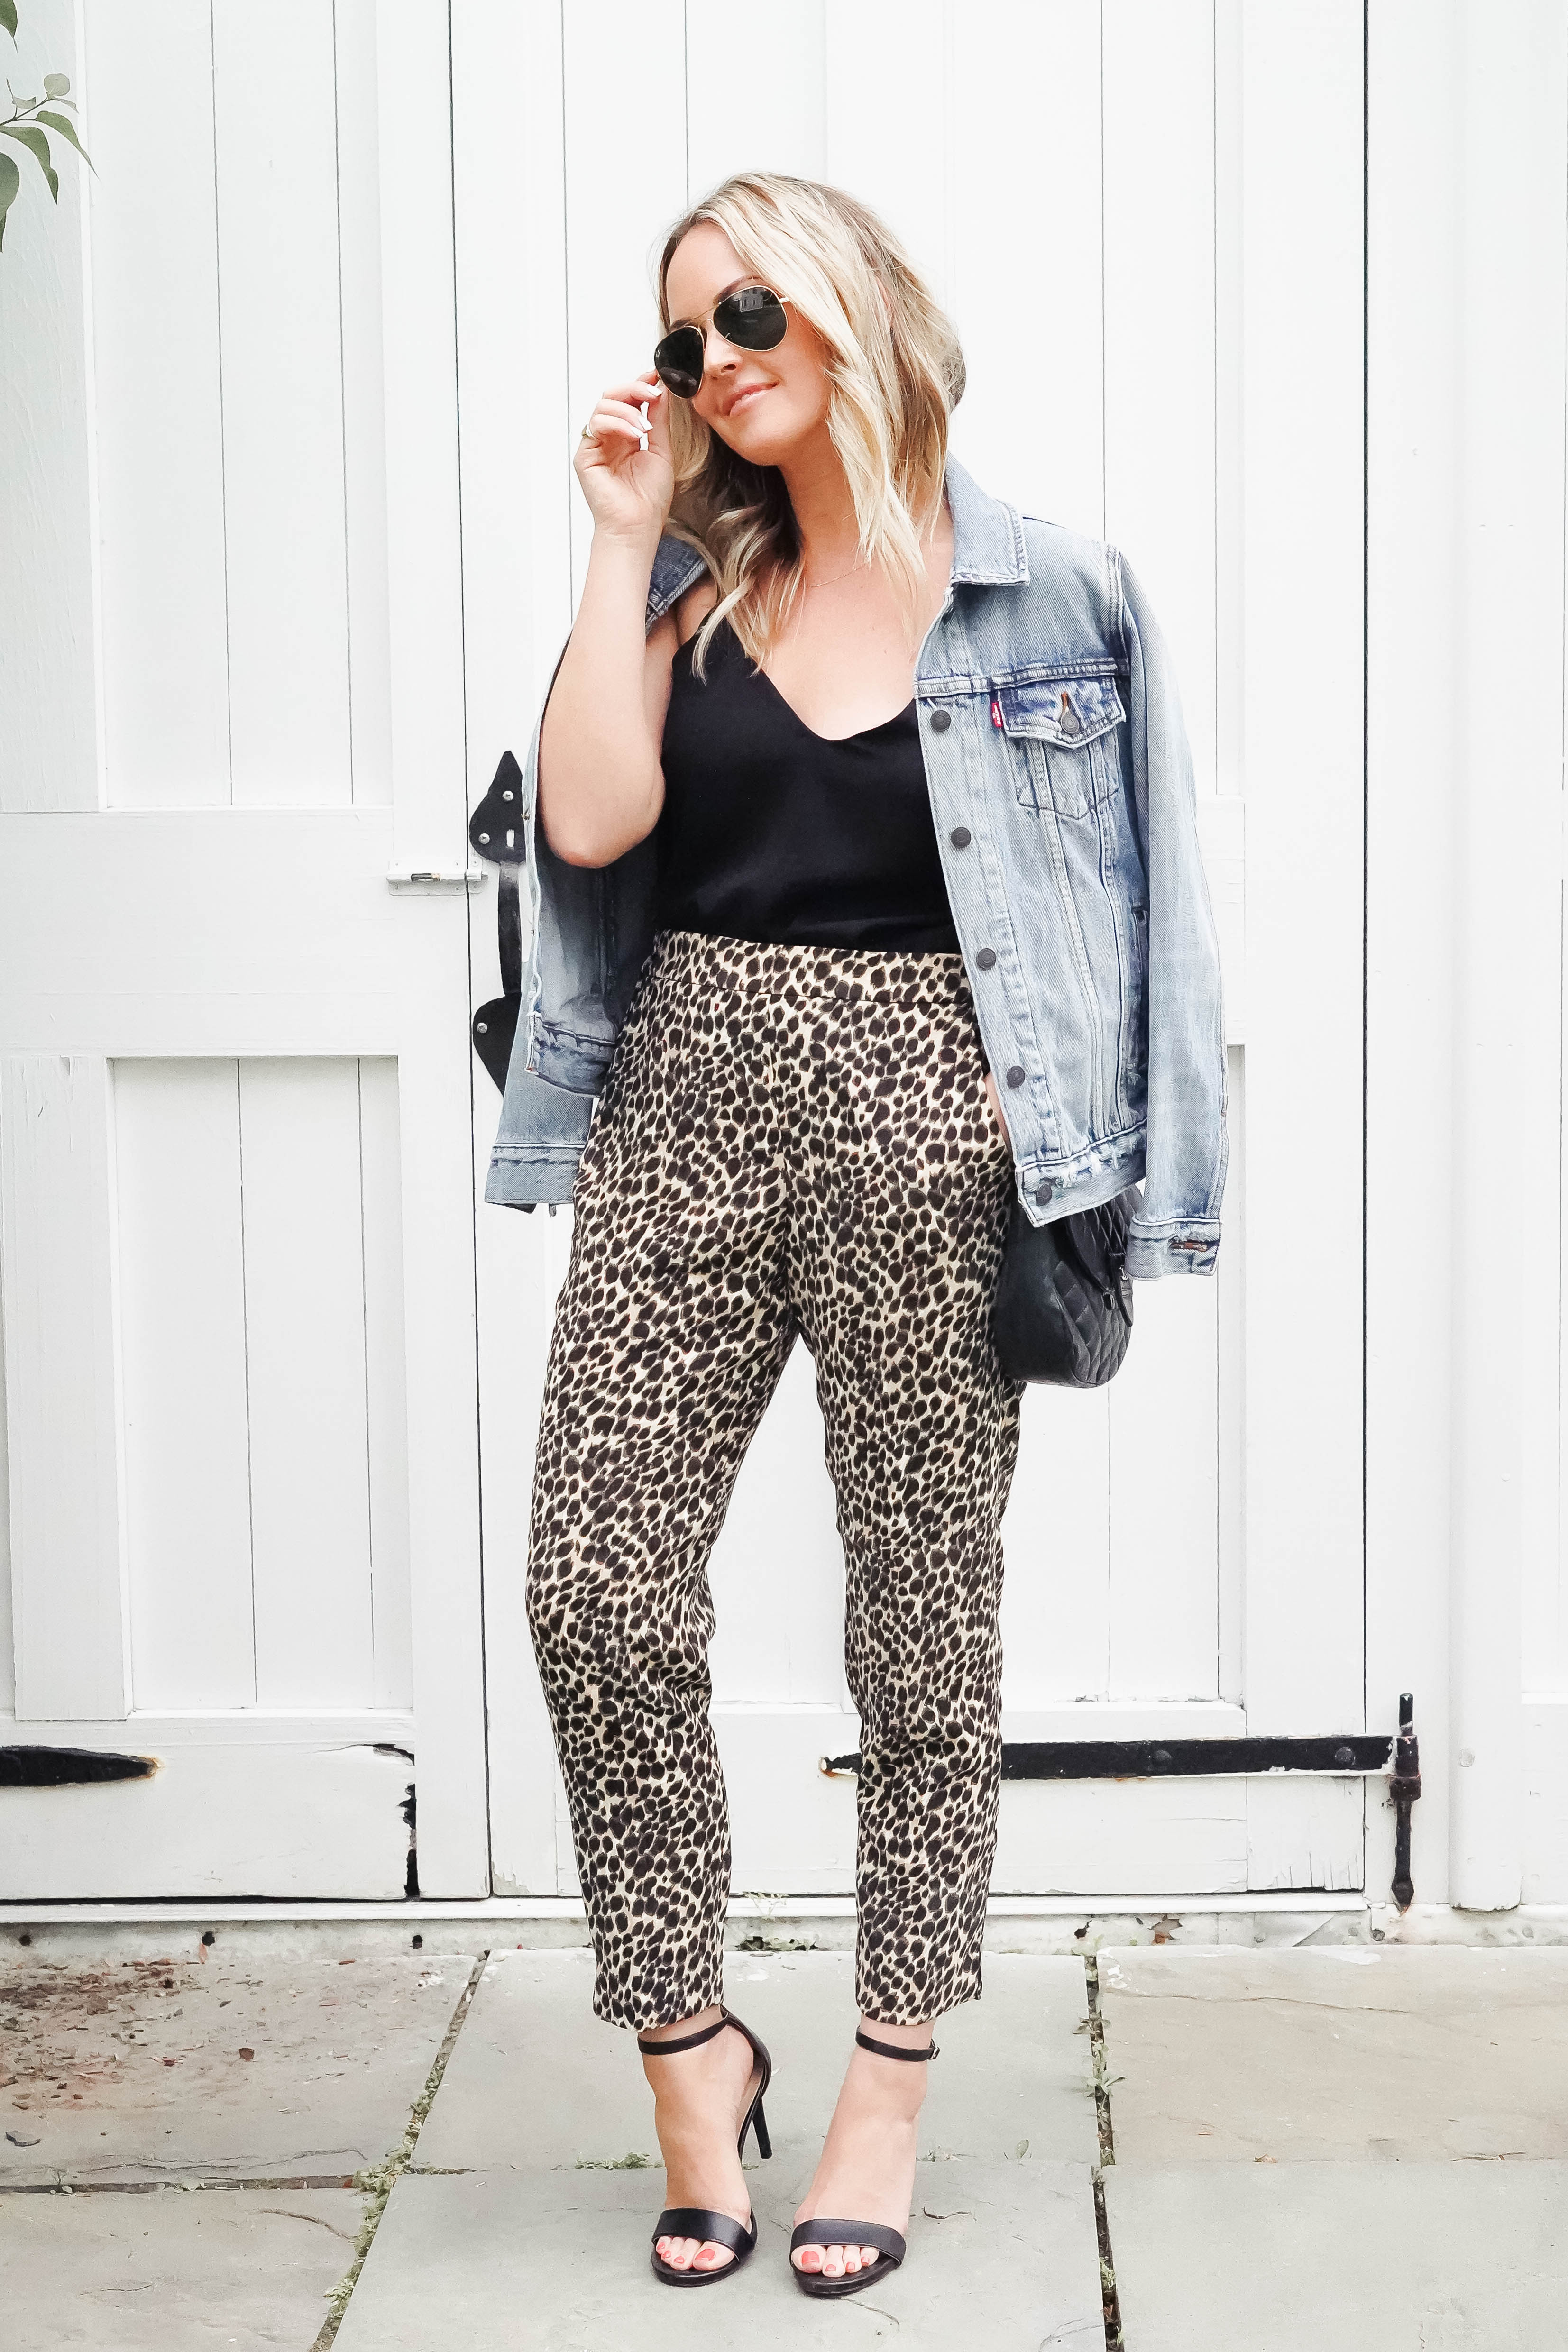 How to Style: Cheetah Print Pants 🐆 #howtostyle